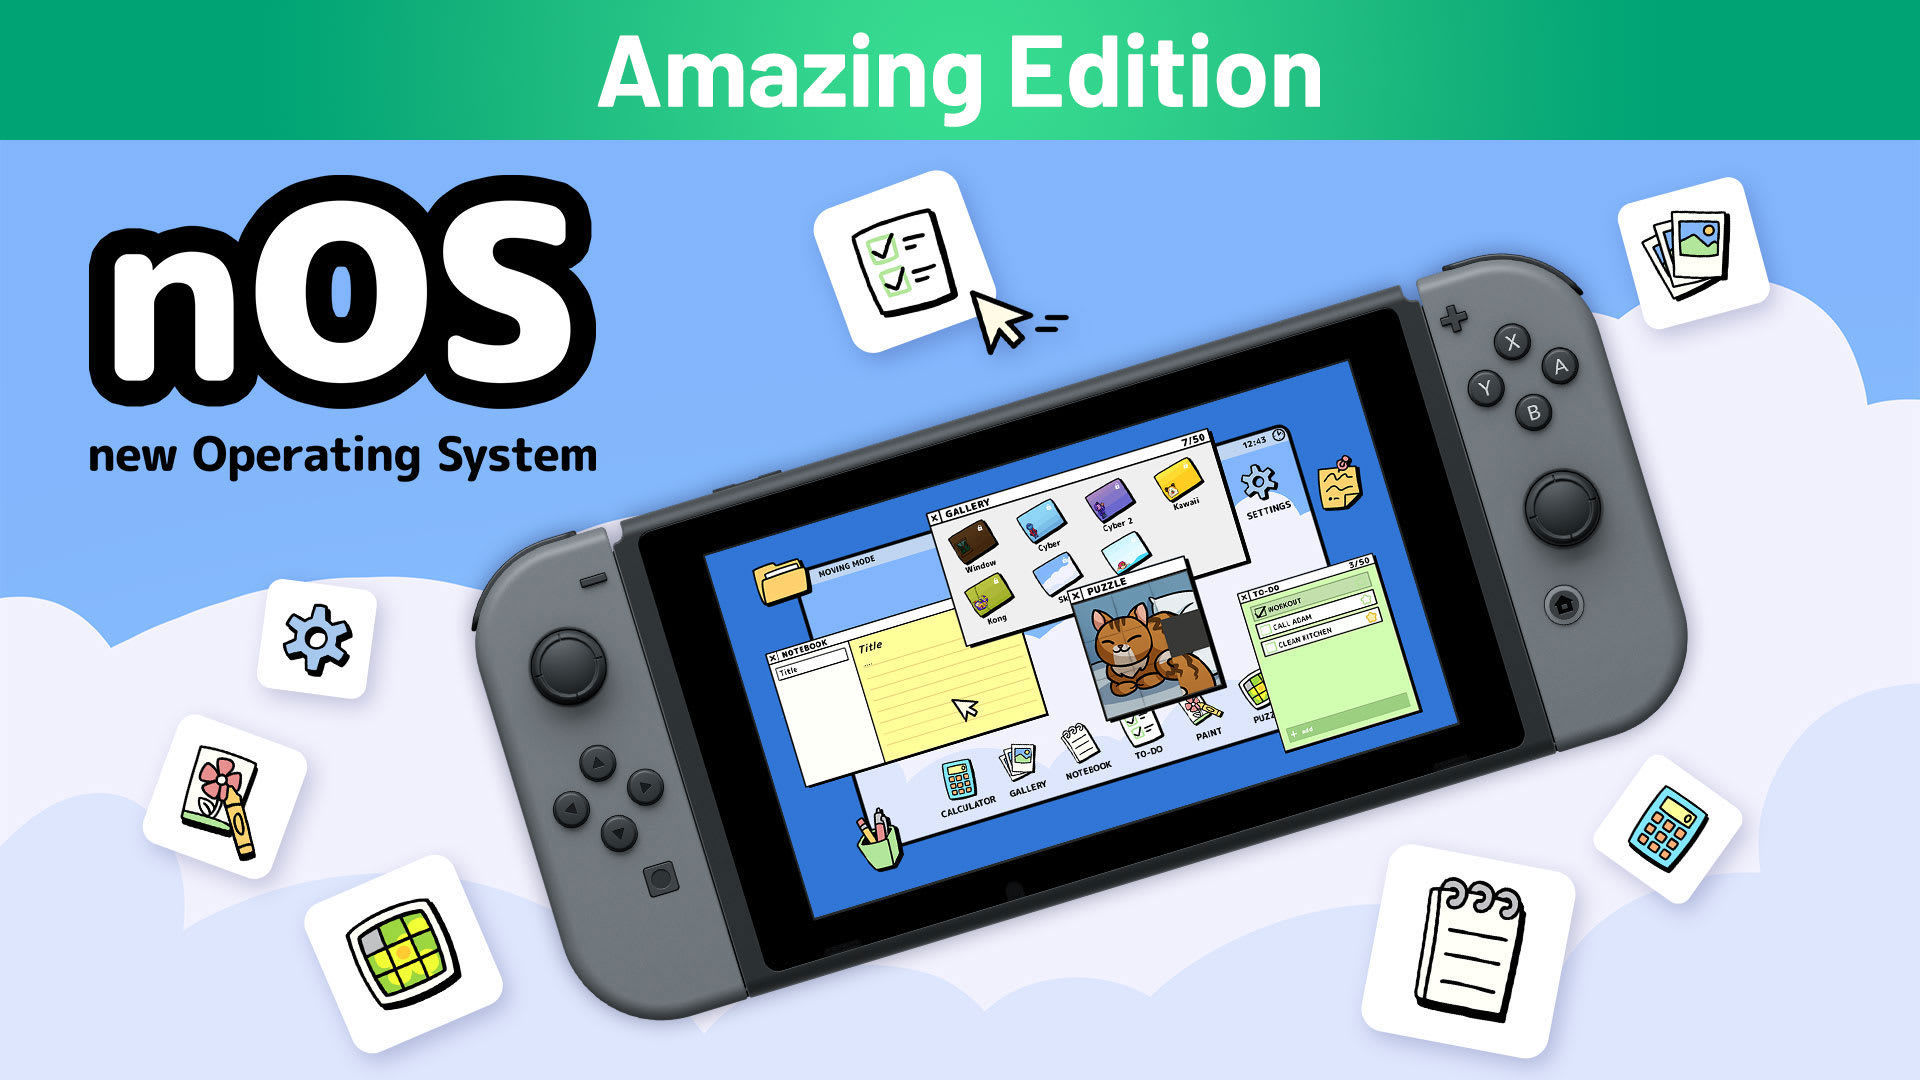 nOS new Operating System Amazing Edition